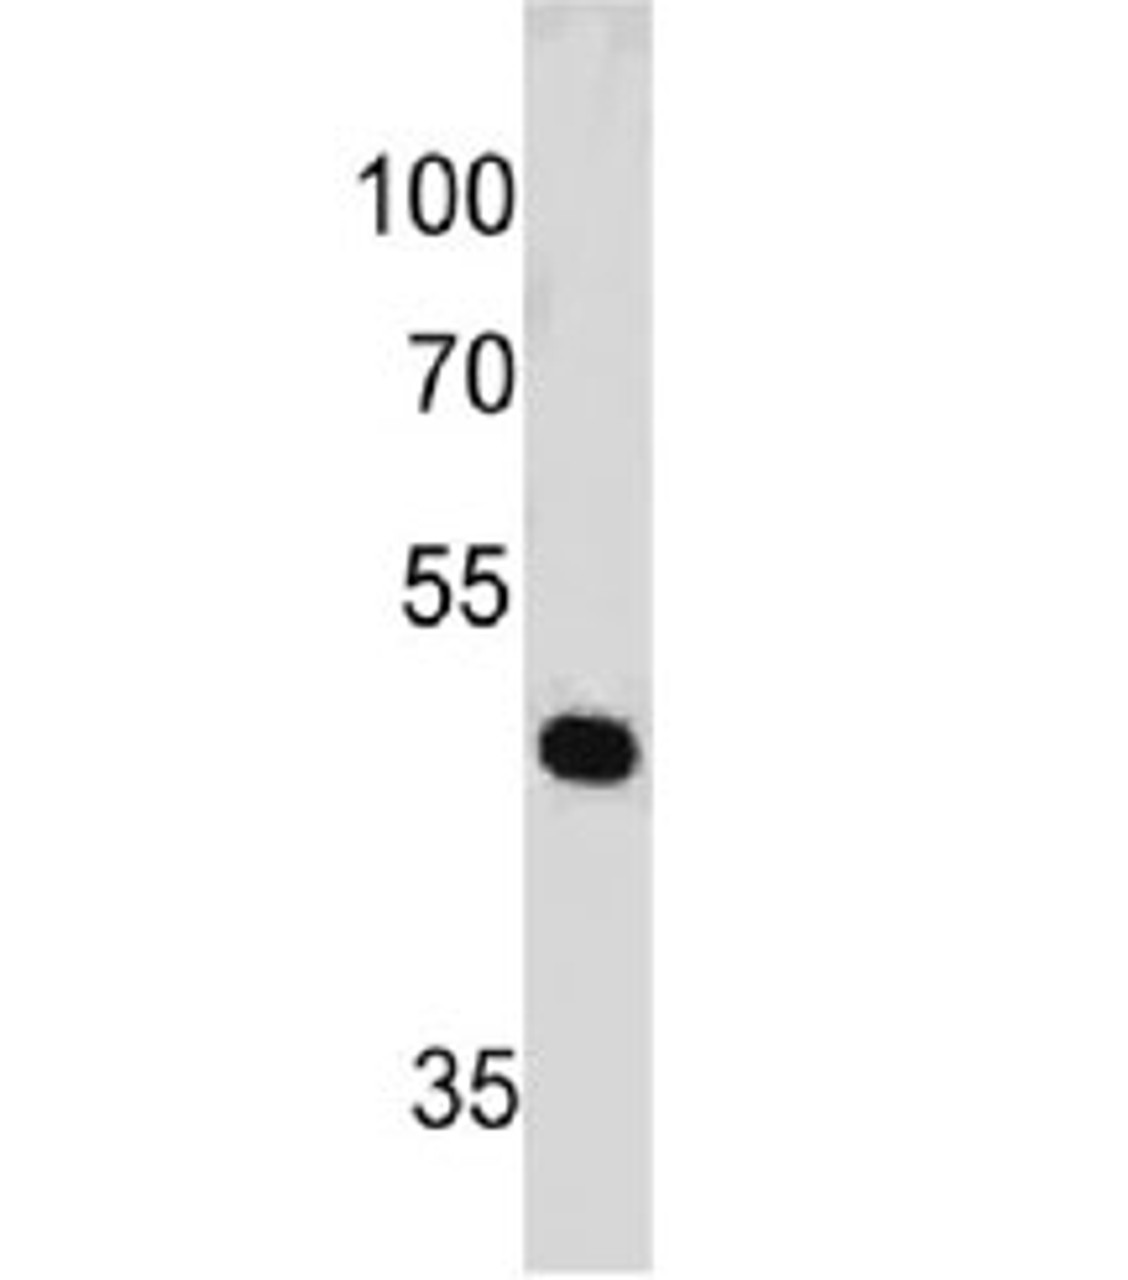 Western blot testing of human HeLa cell lysate with PAX7 antibody (clone PAX7/497) . Expected molecular weight: 55-57 kDa.